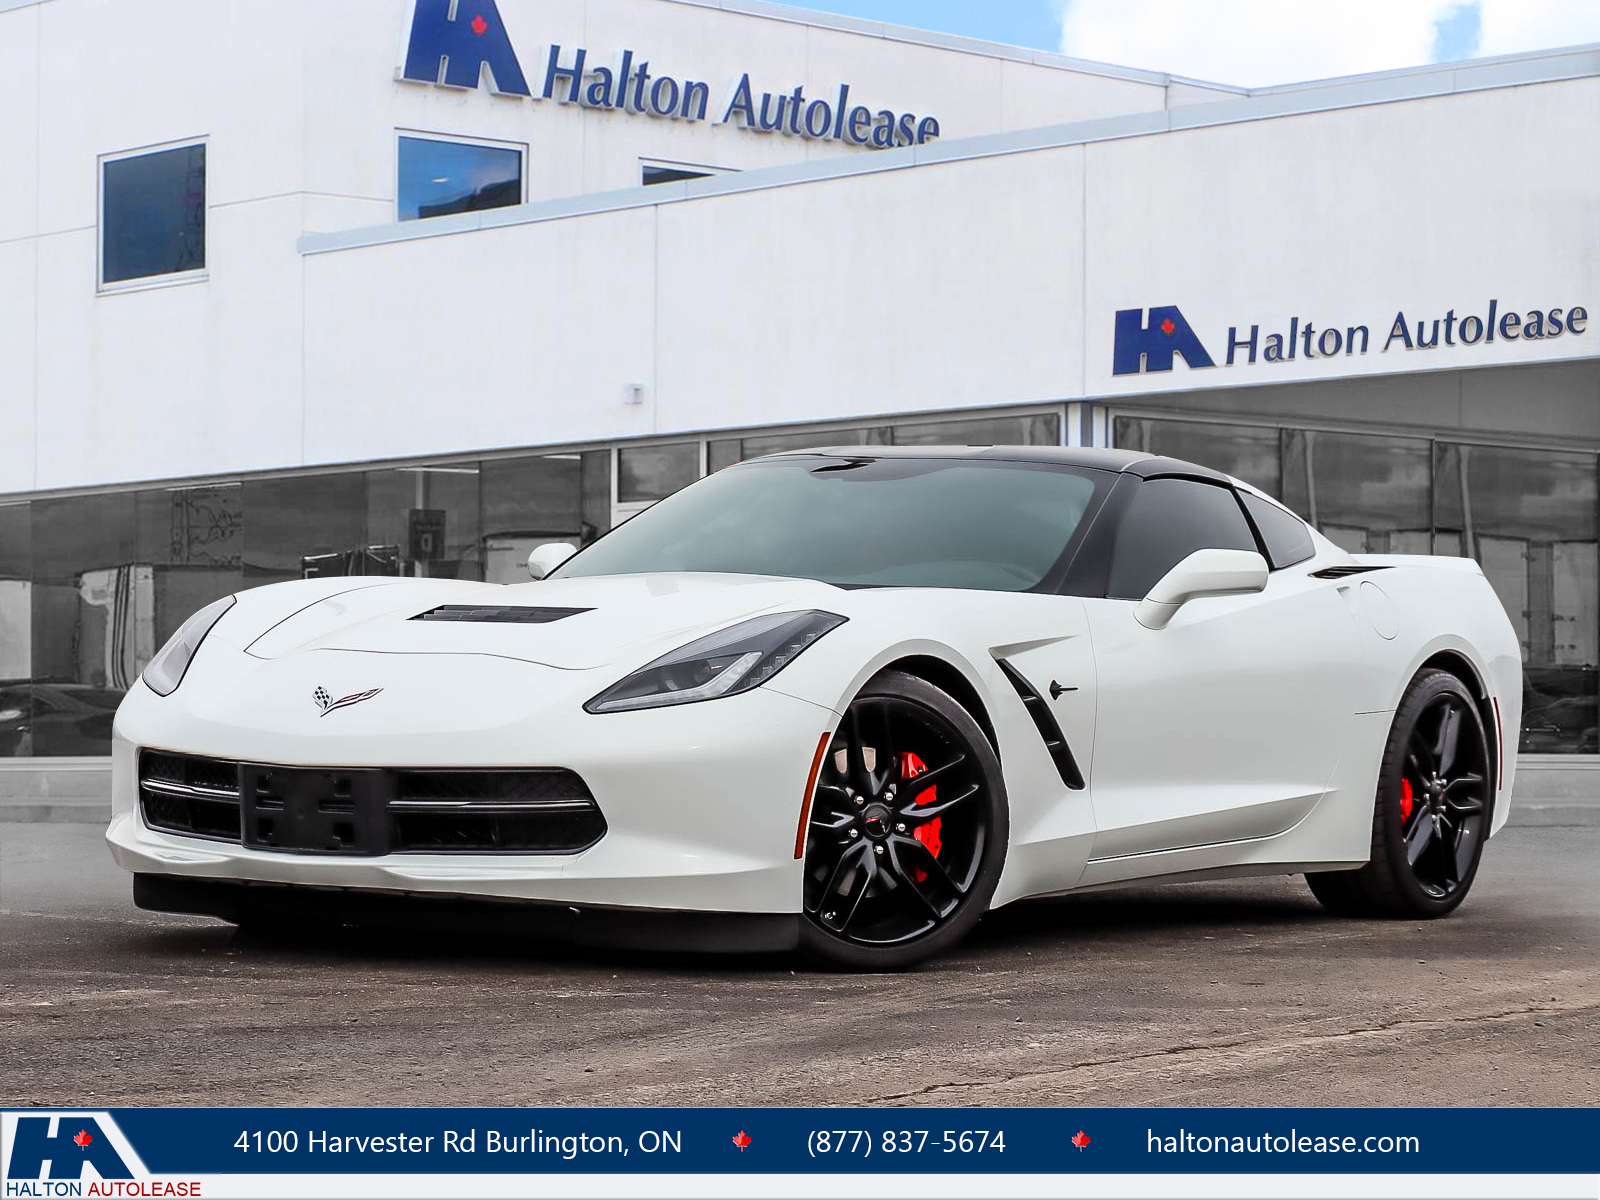 2016 Chevrolet Corvette 1LT Coupe | 6 Speed Manual | Red Leather | PW,PL,P